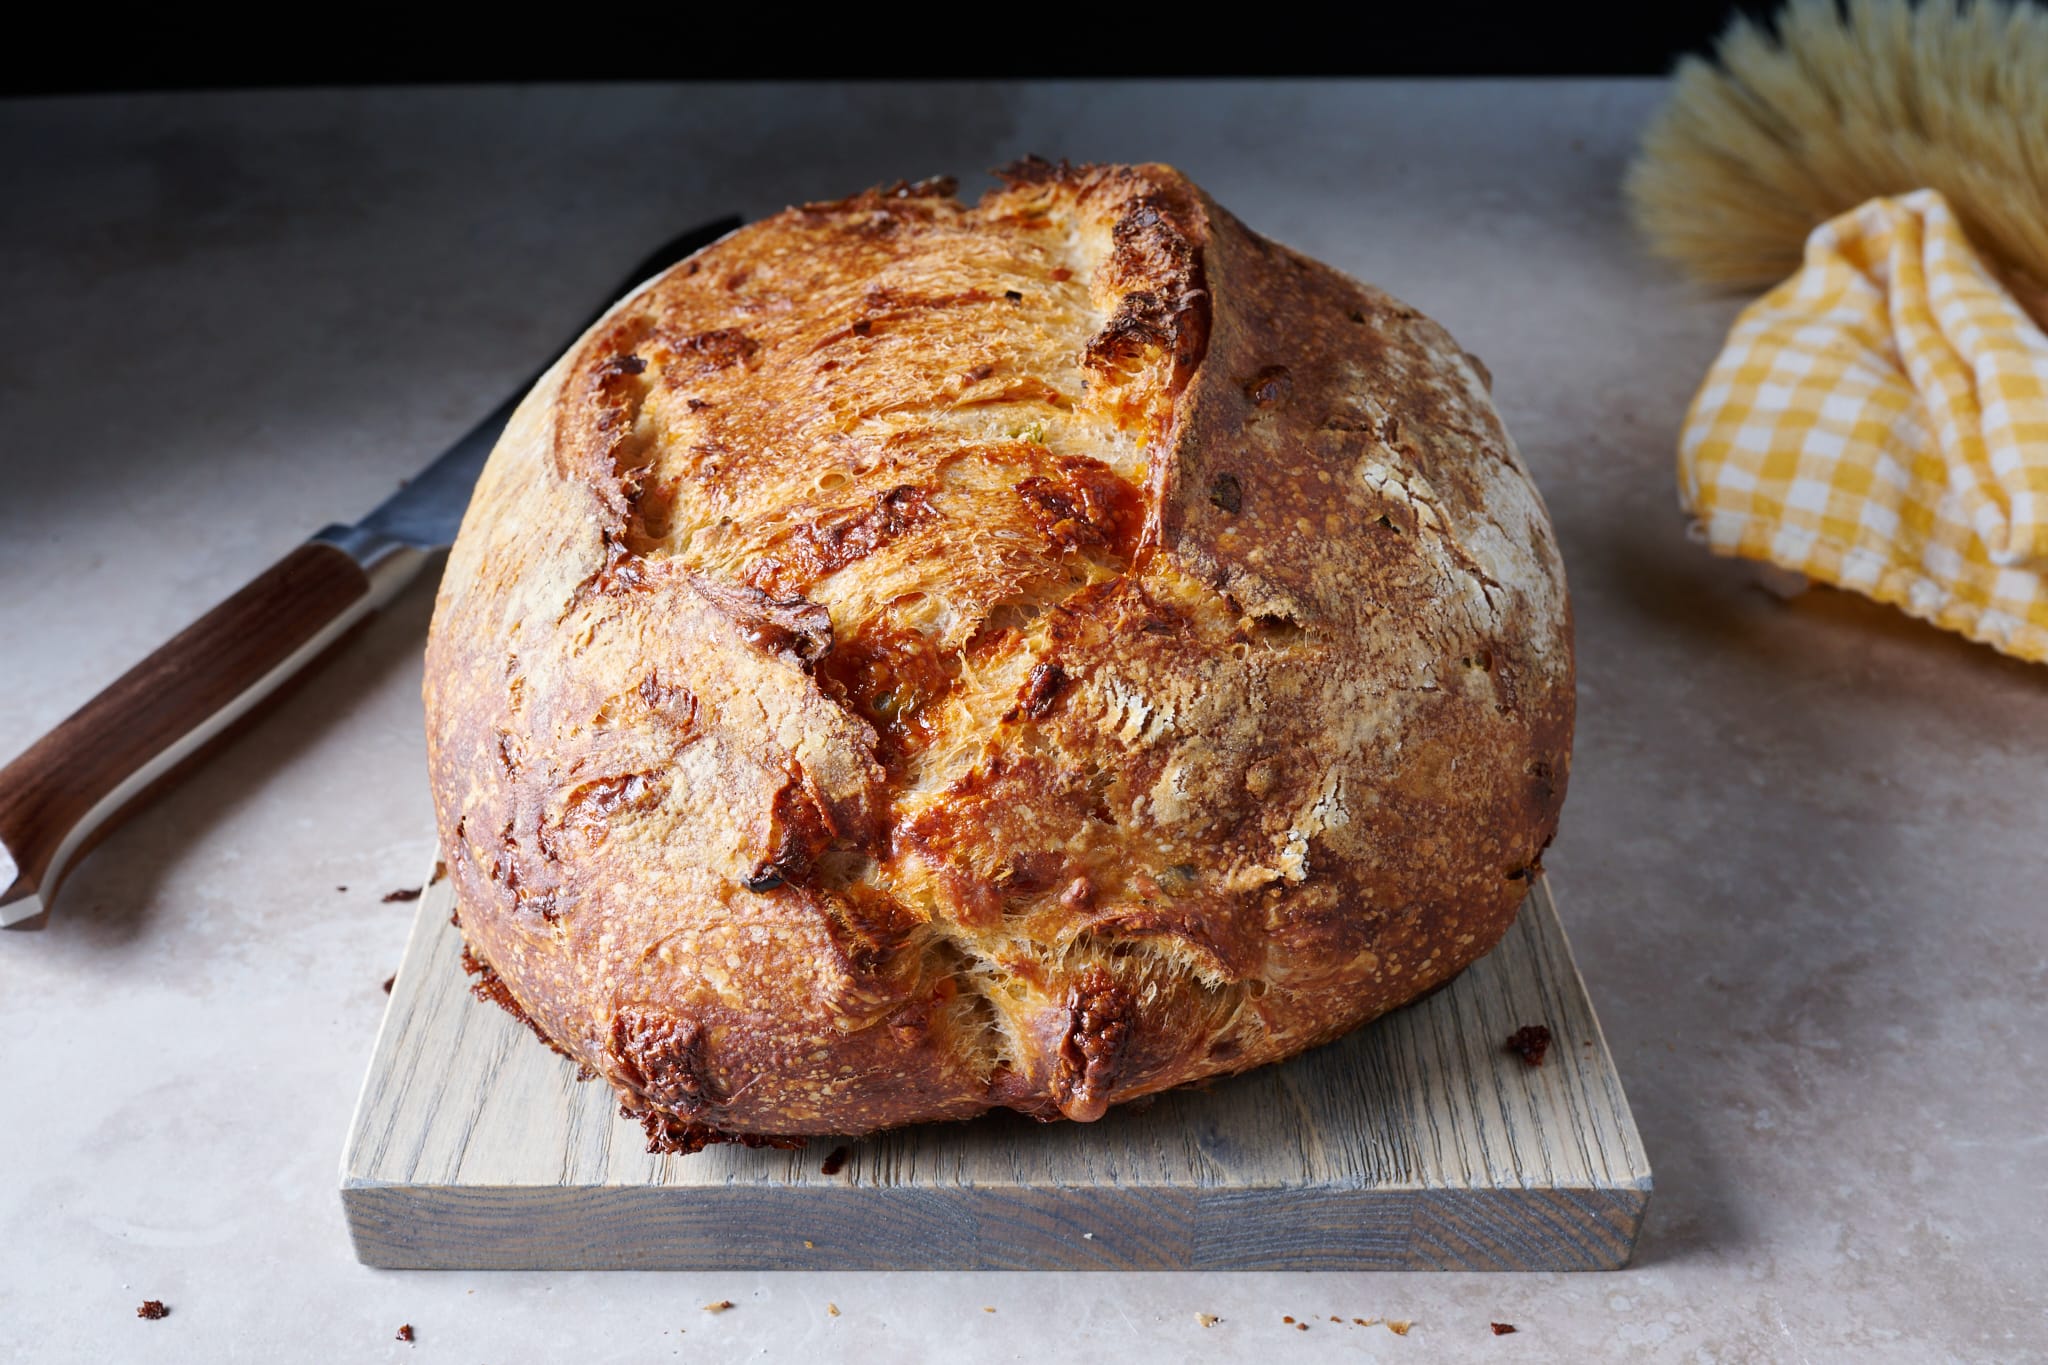 How To Bake Sourdough Without A Dutch Oven - crave the good